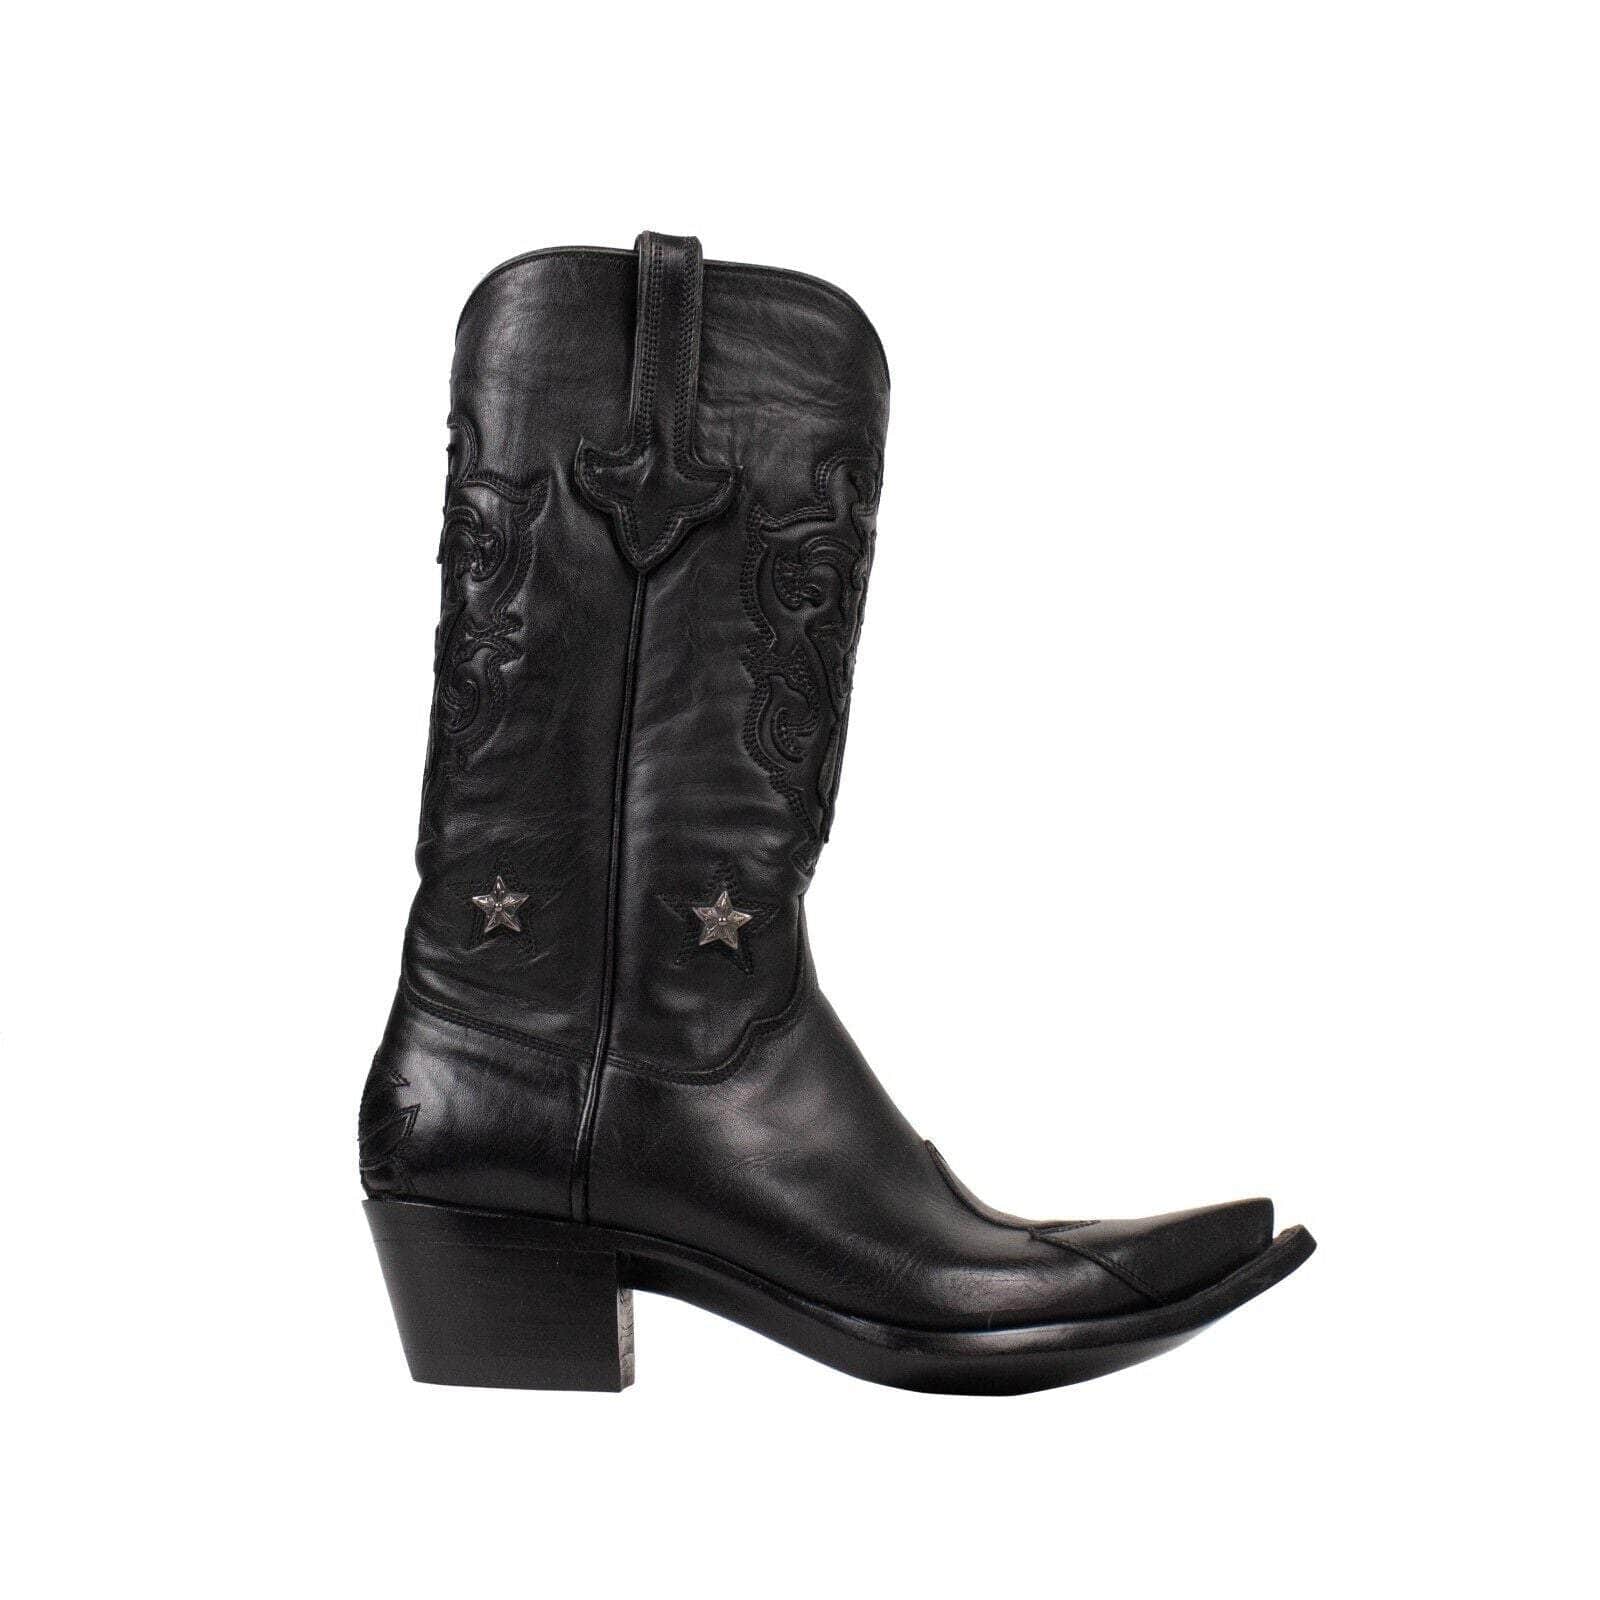 CHROME HEARTS Black Leather Western Cowboy Boots